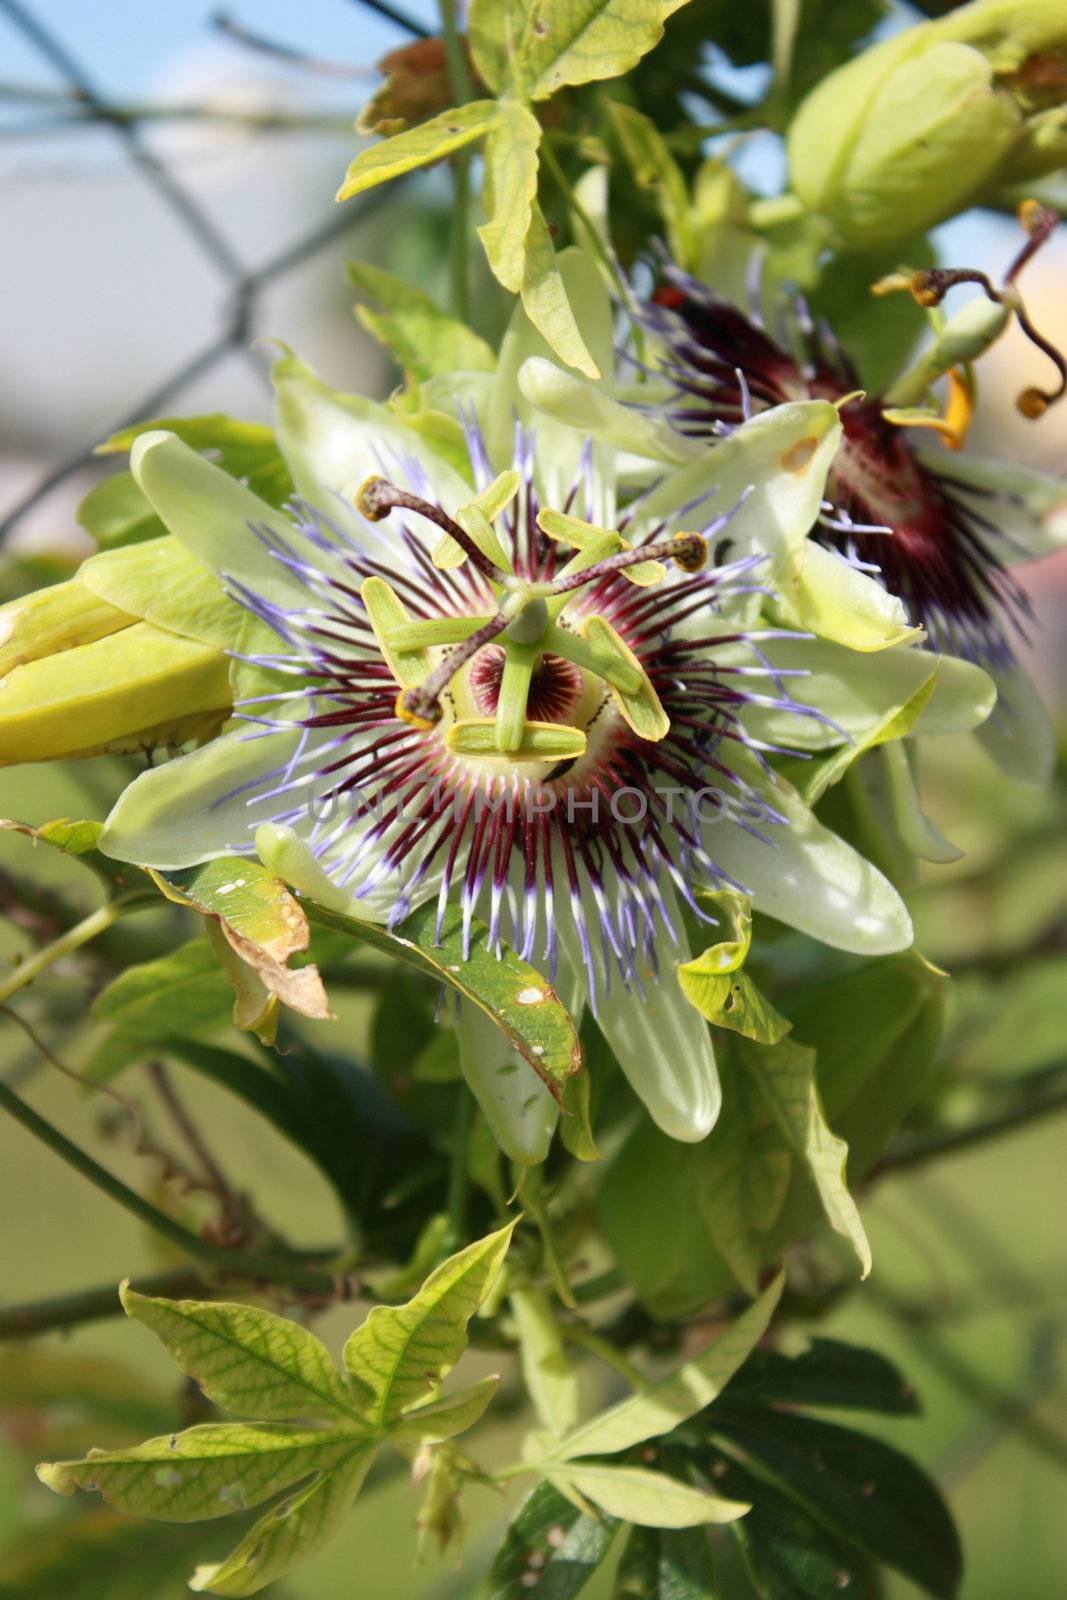 Passionflower in the plant